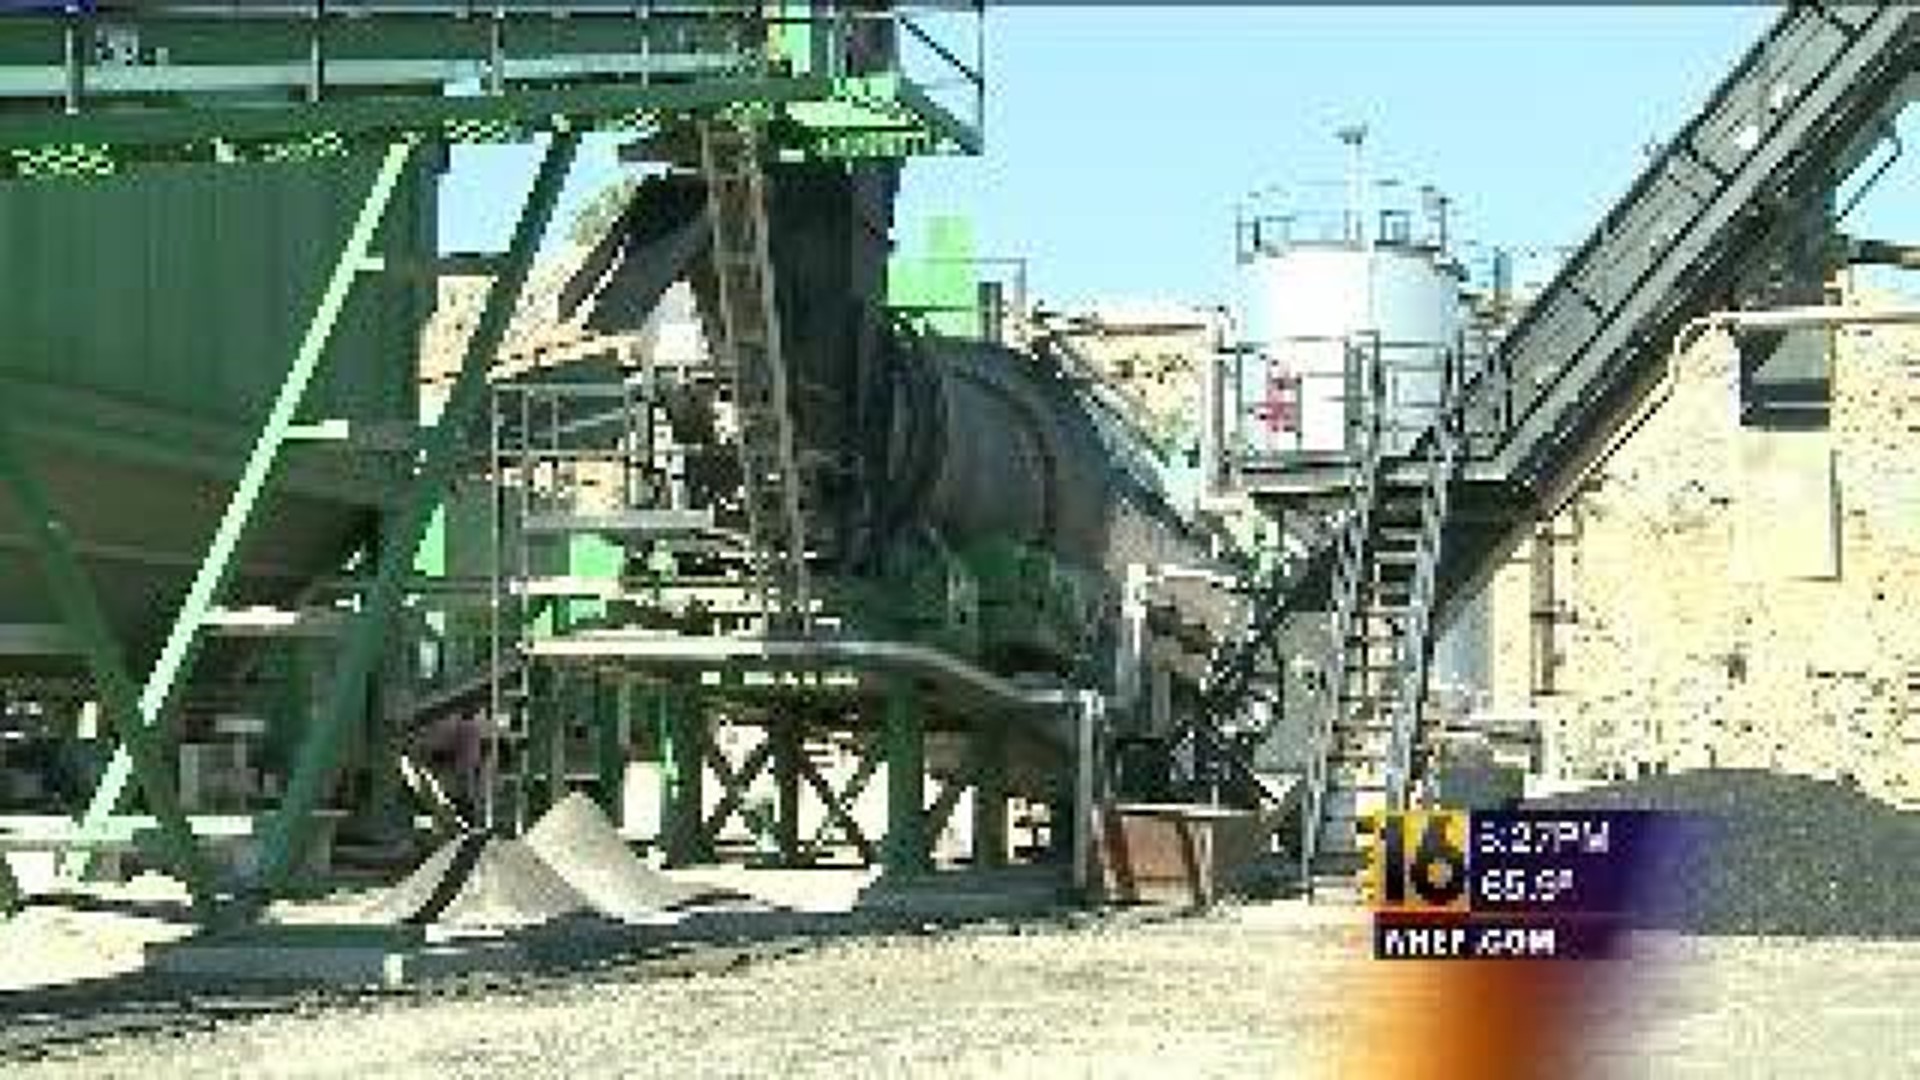 Natural Gas will Stay in Susquehanna County